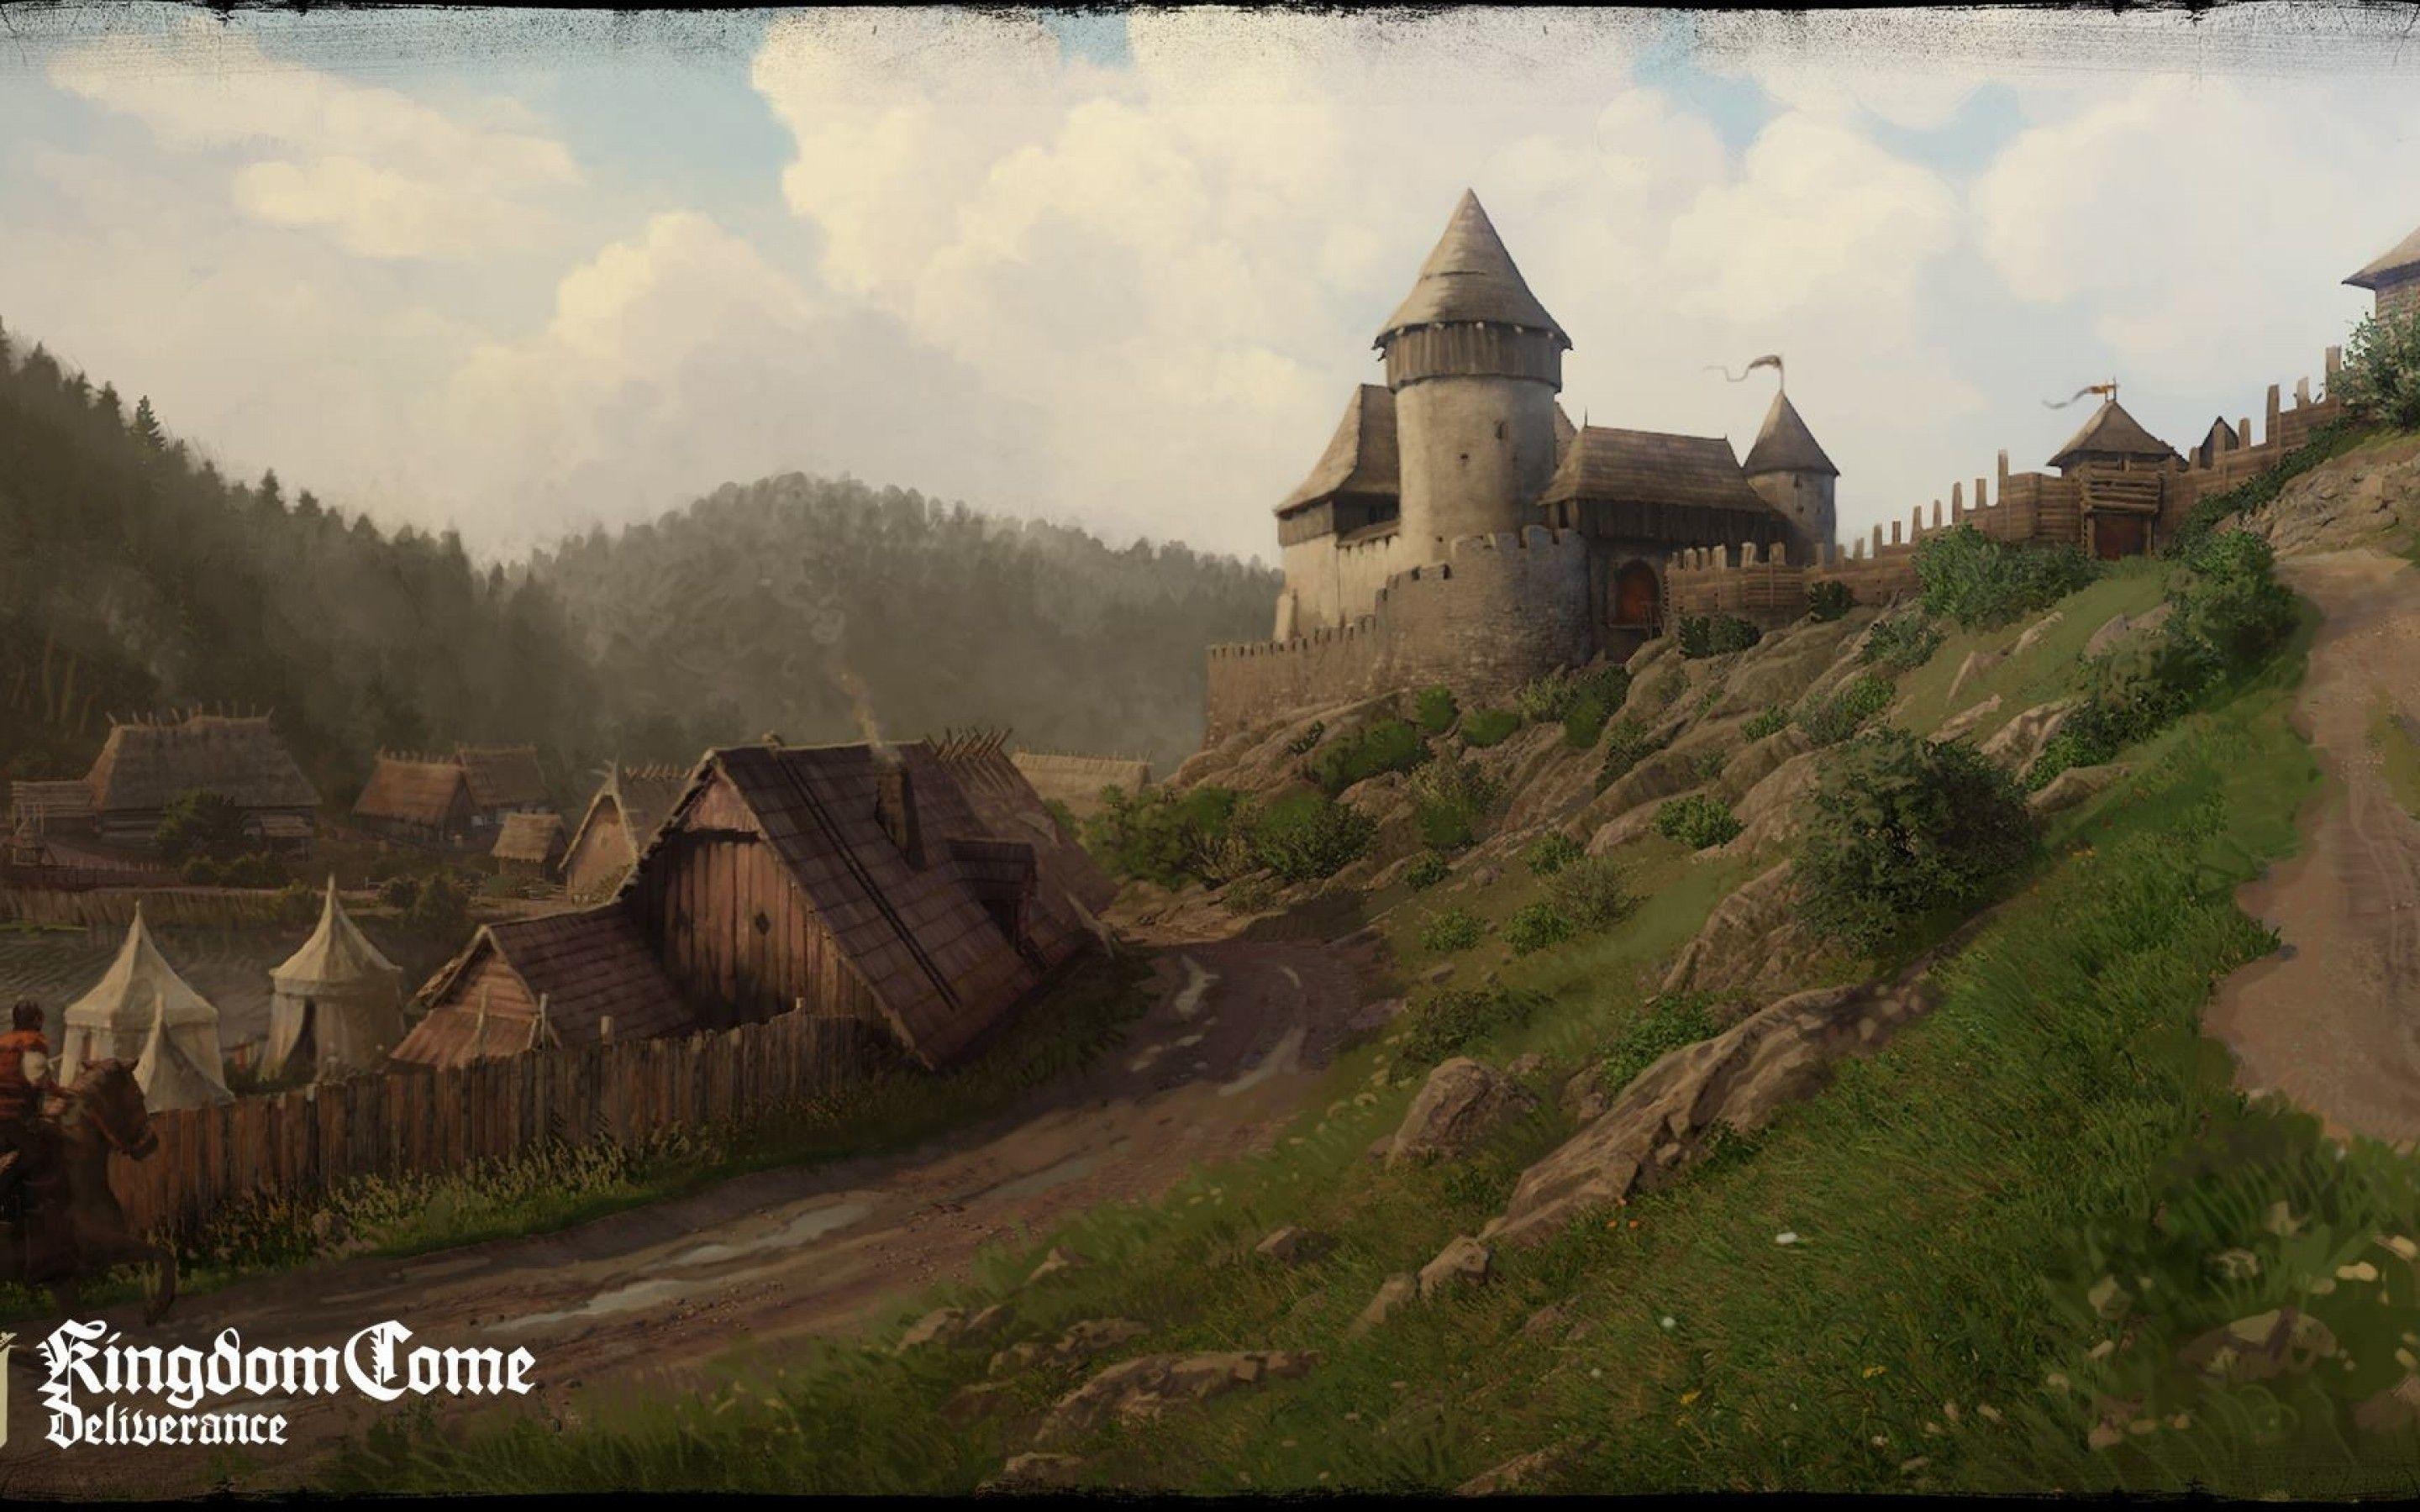 Kingdom Come Deliverance Wallpapers Top Free Kingdom Come Deliverance Backgrounds Wallpaperaccess